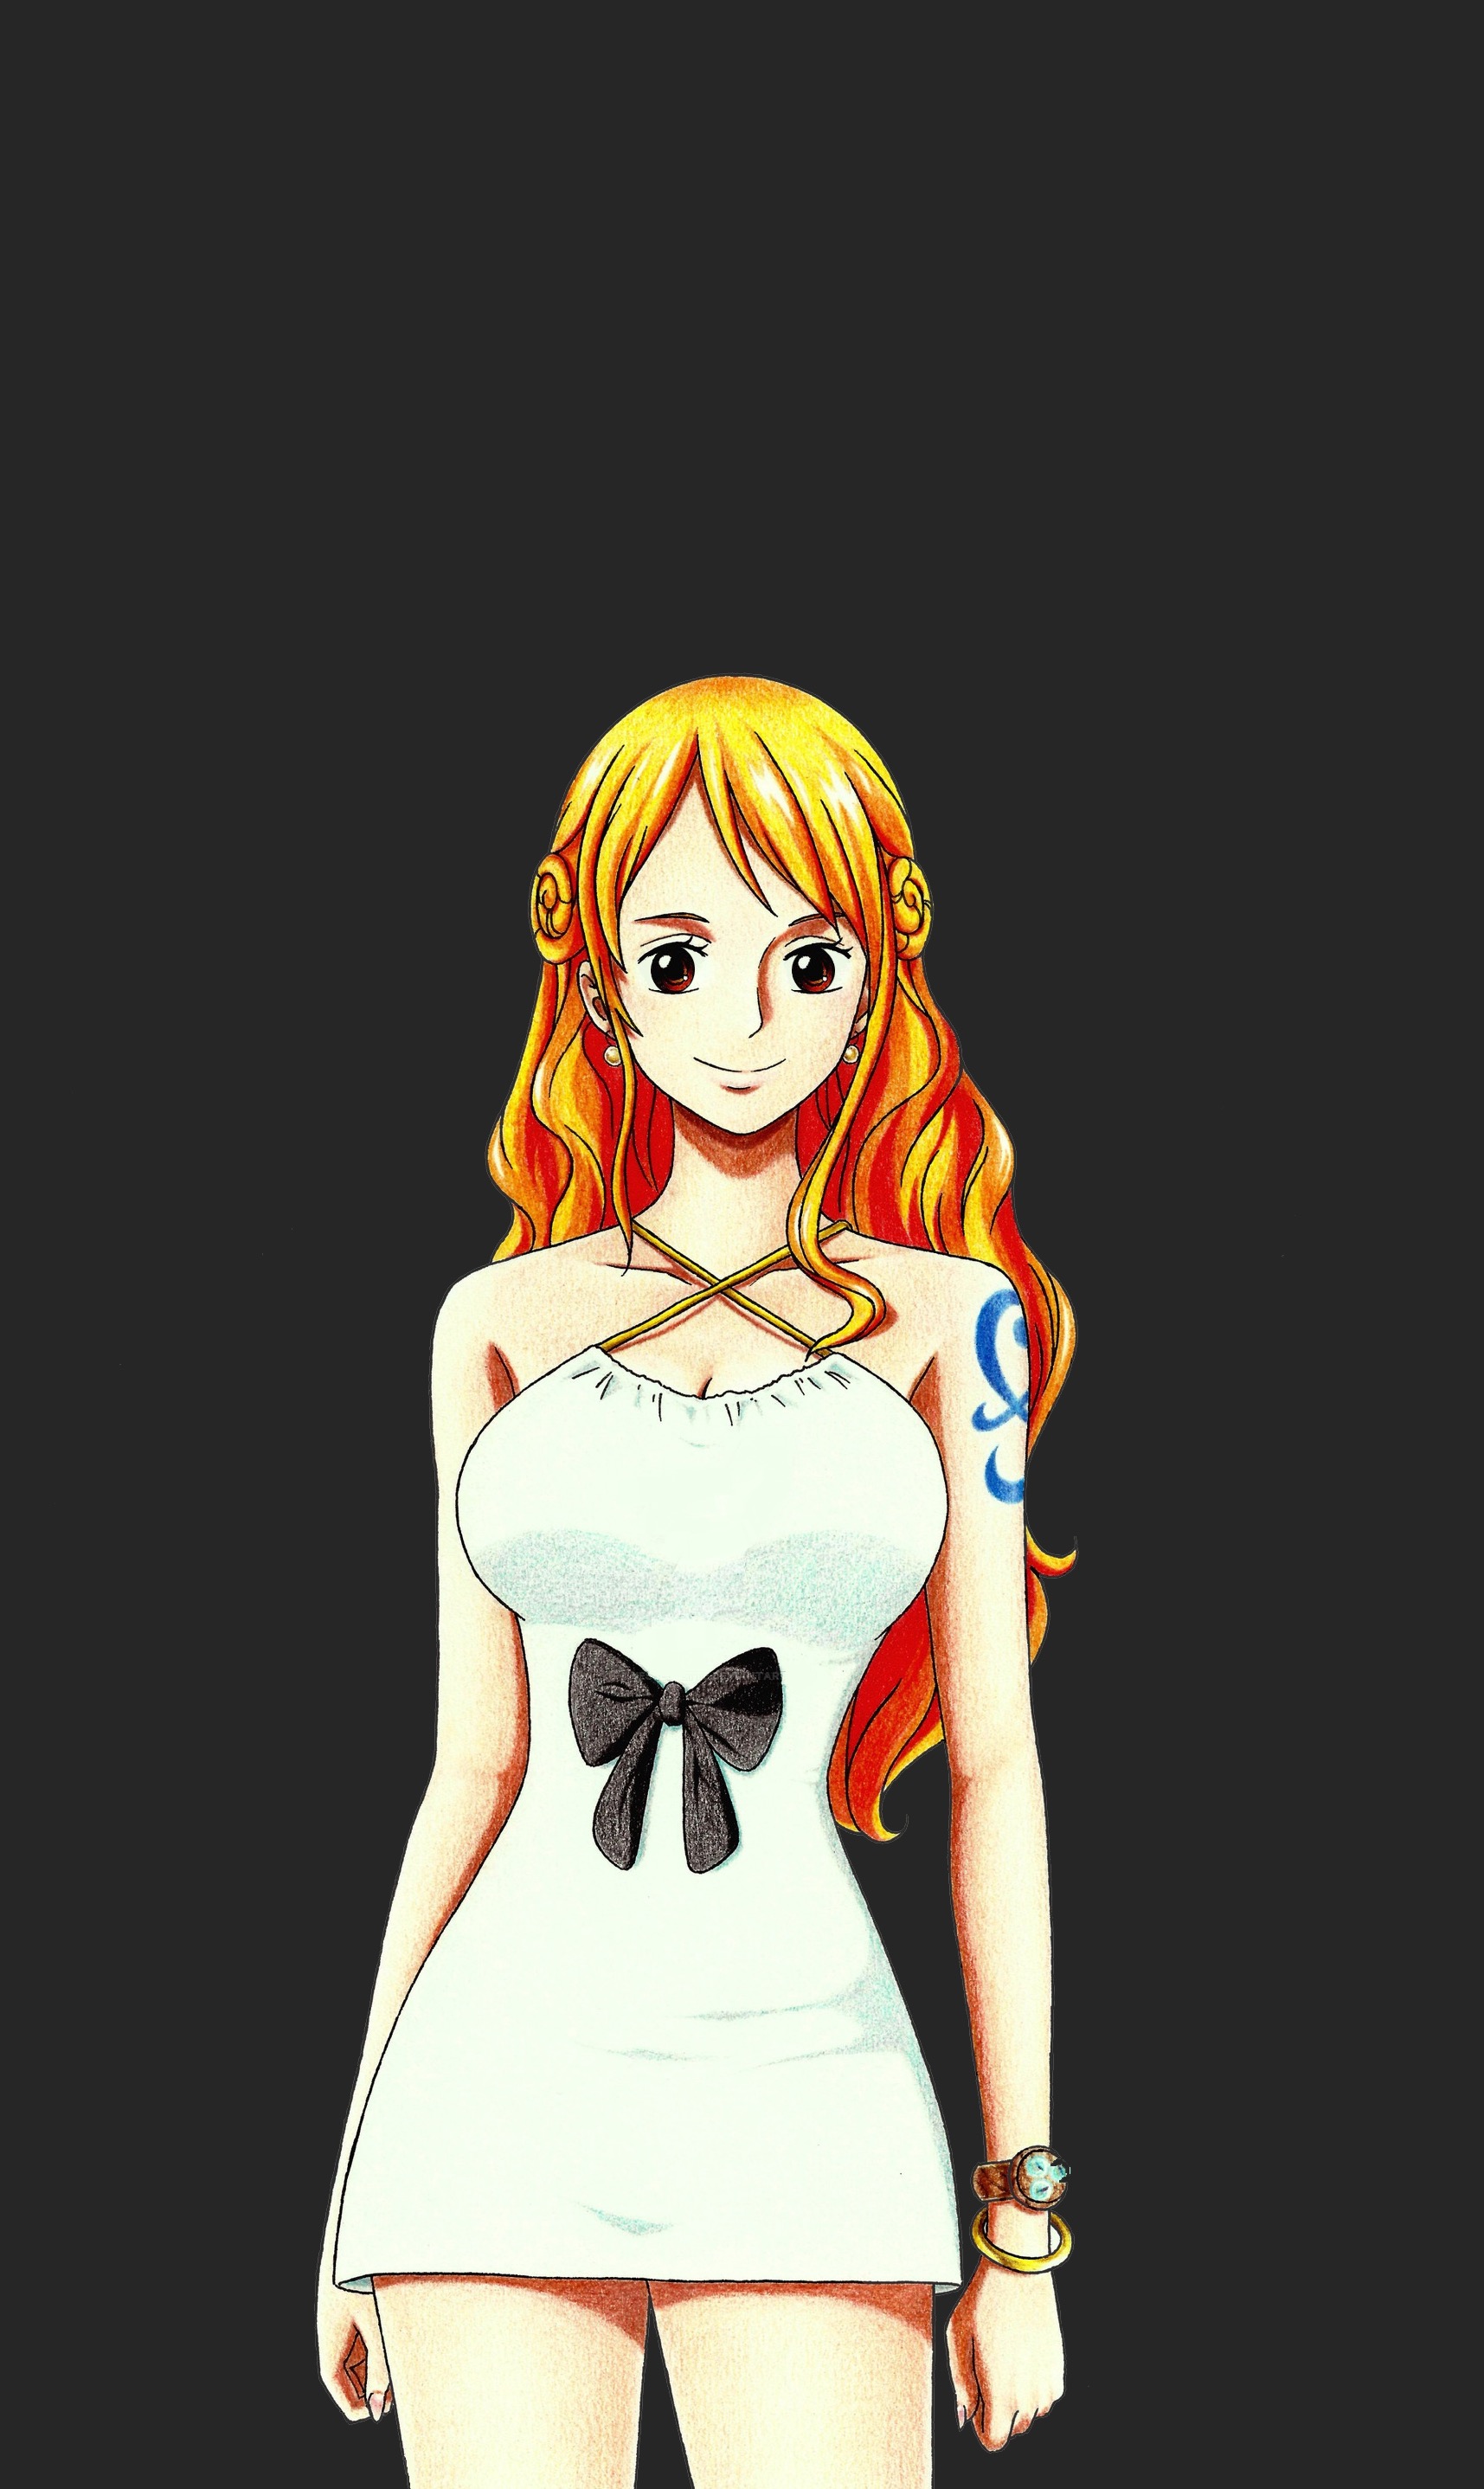 Nami One Piece Red Anime Wallpaper 4k Ultra HD ID10687